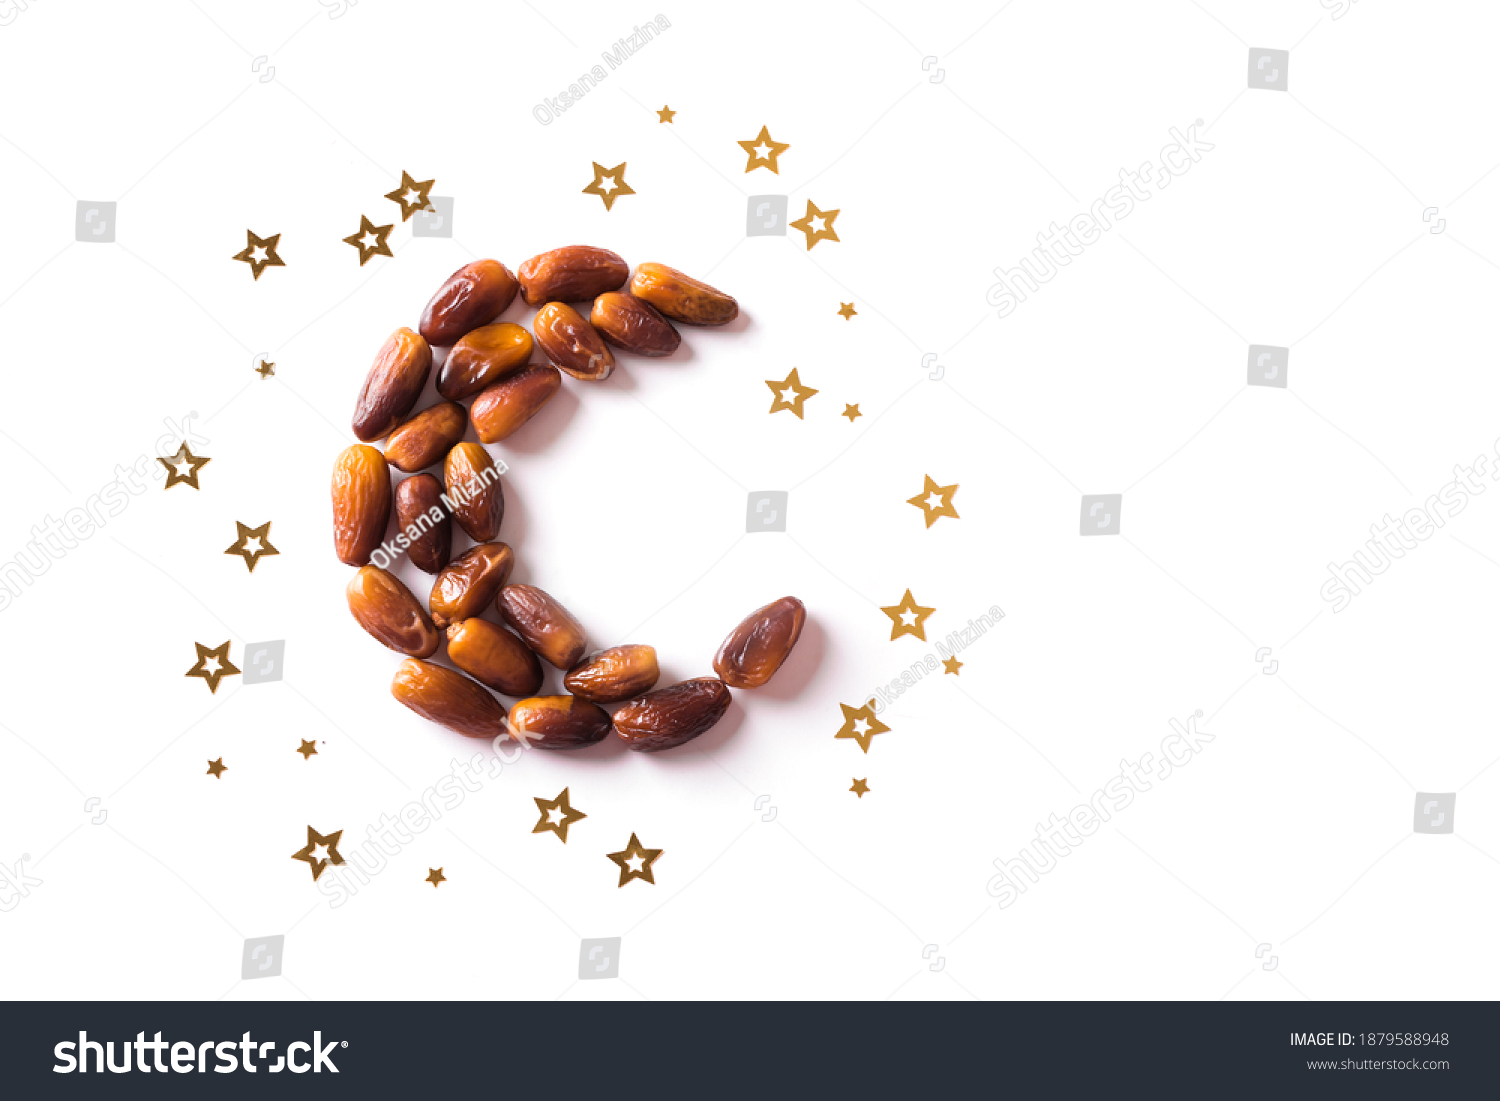 Islamic Crescent. Ramadan kareem with dates fruits arranged in shape of crescent moon isolated on white background, top view, copy space. Iftar food concept. #1879588948